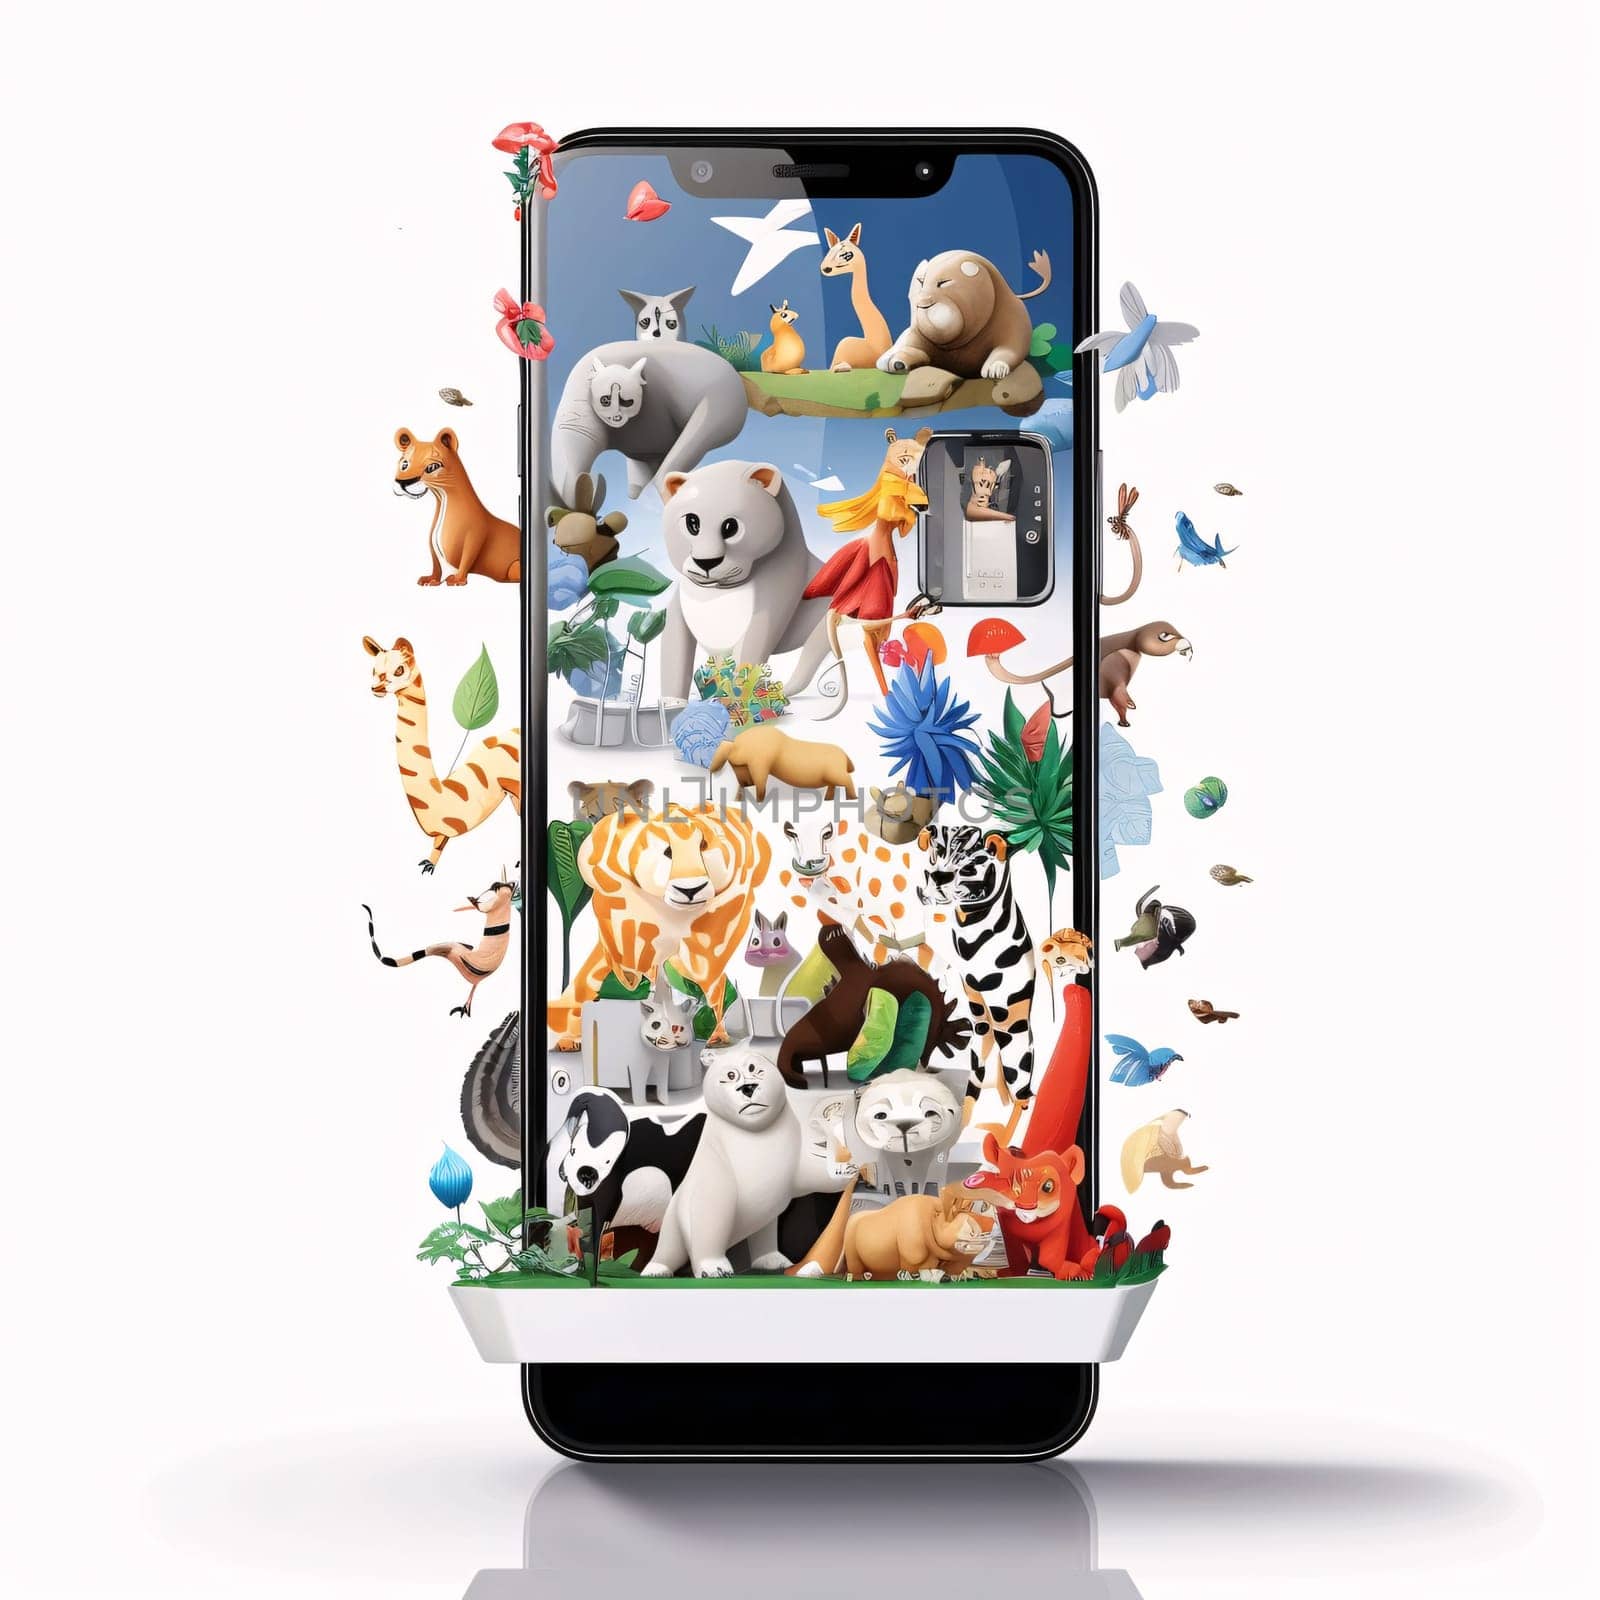 Smartphone screen: Smartphone with animals on the screen isolated on a white background.